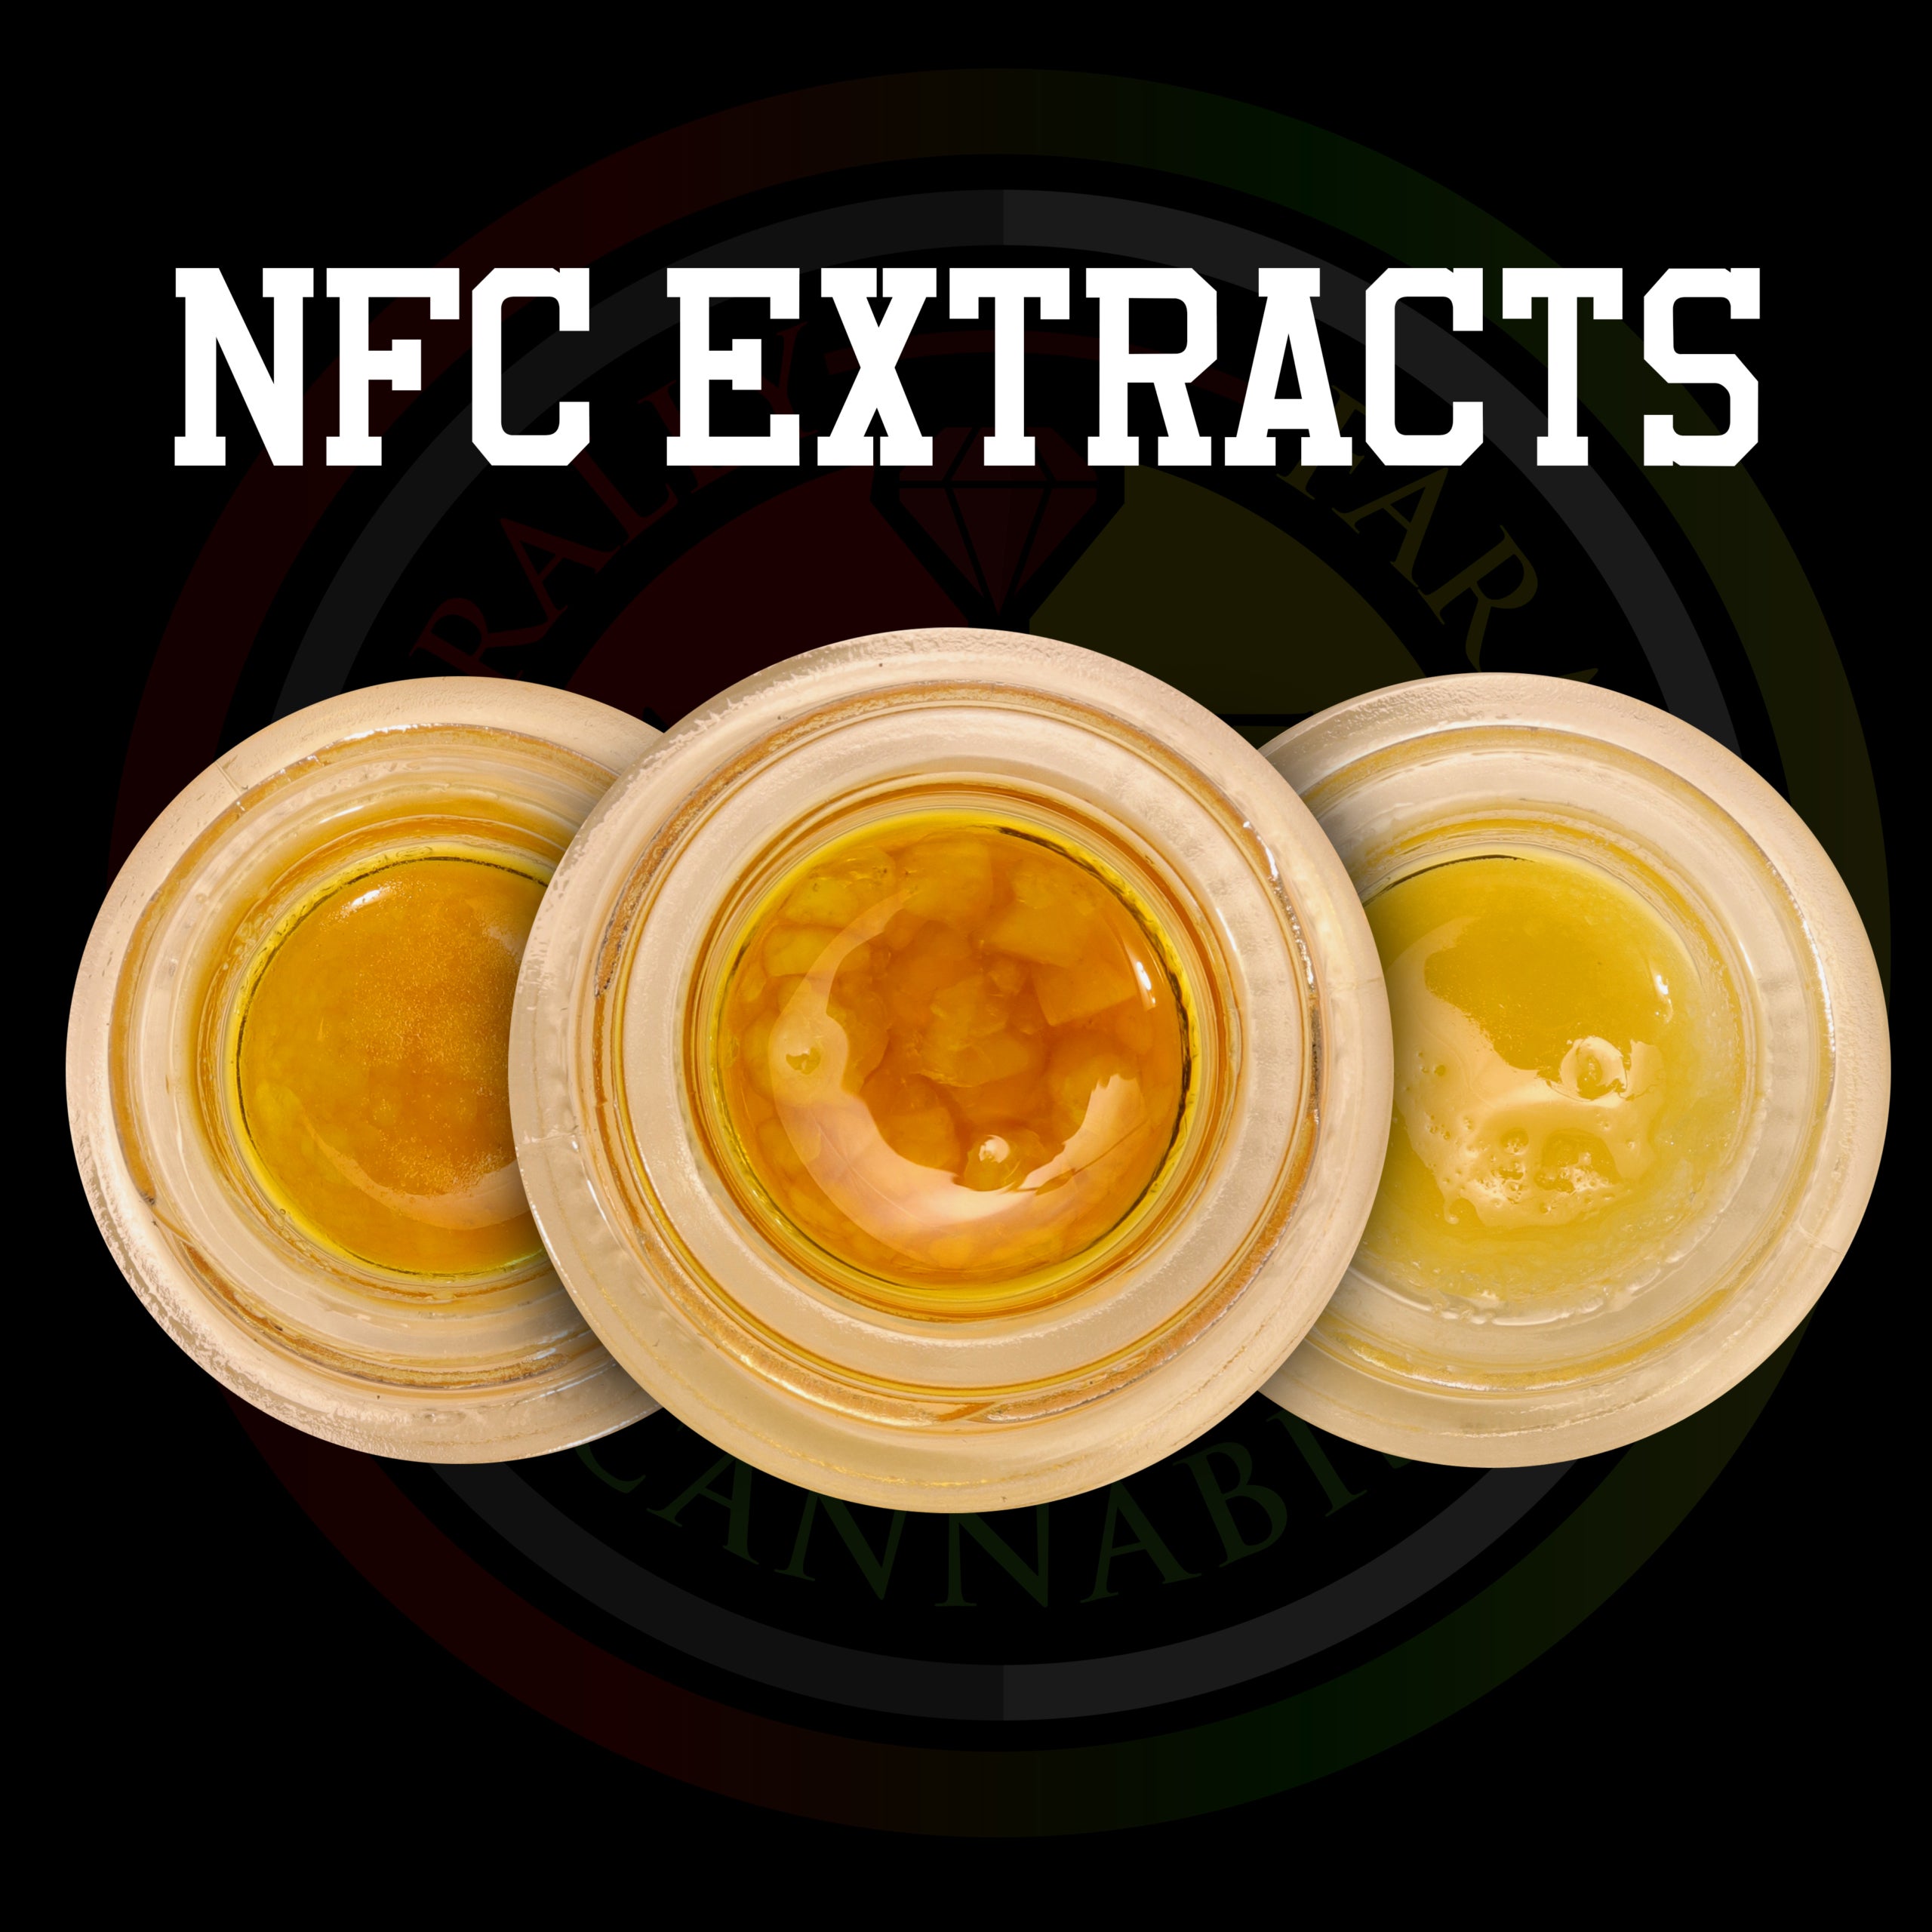 NFC EXTRACTS